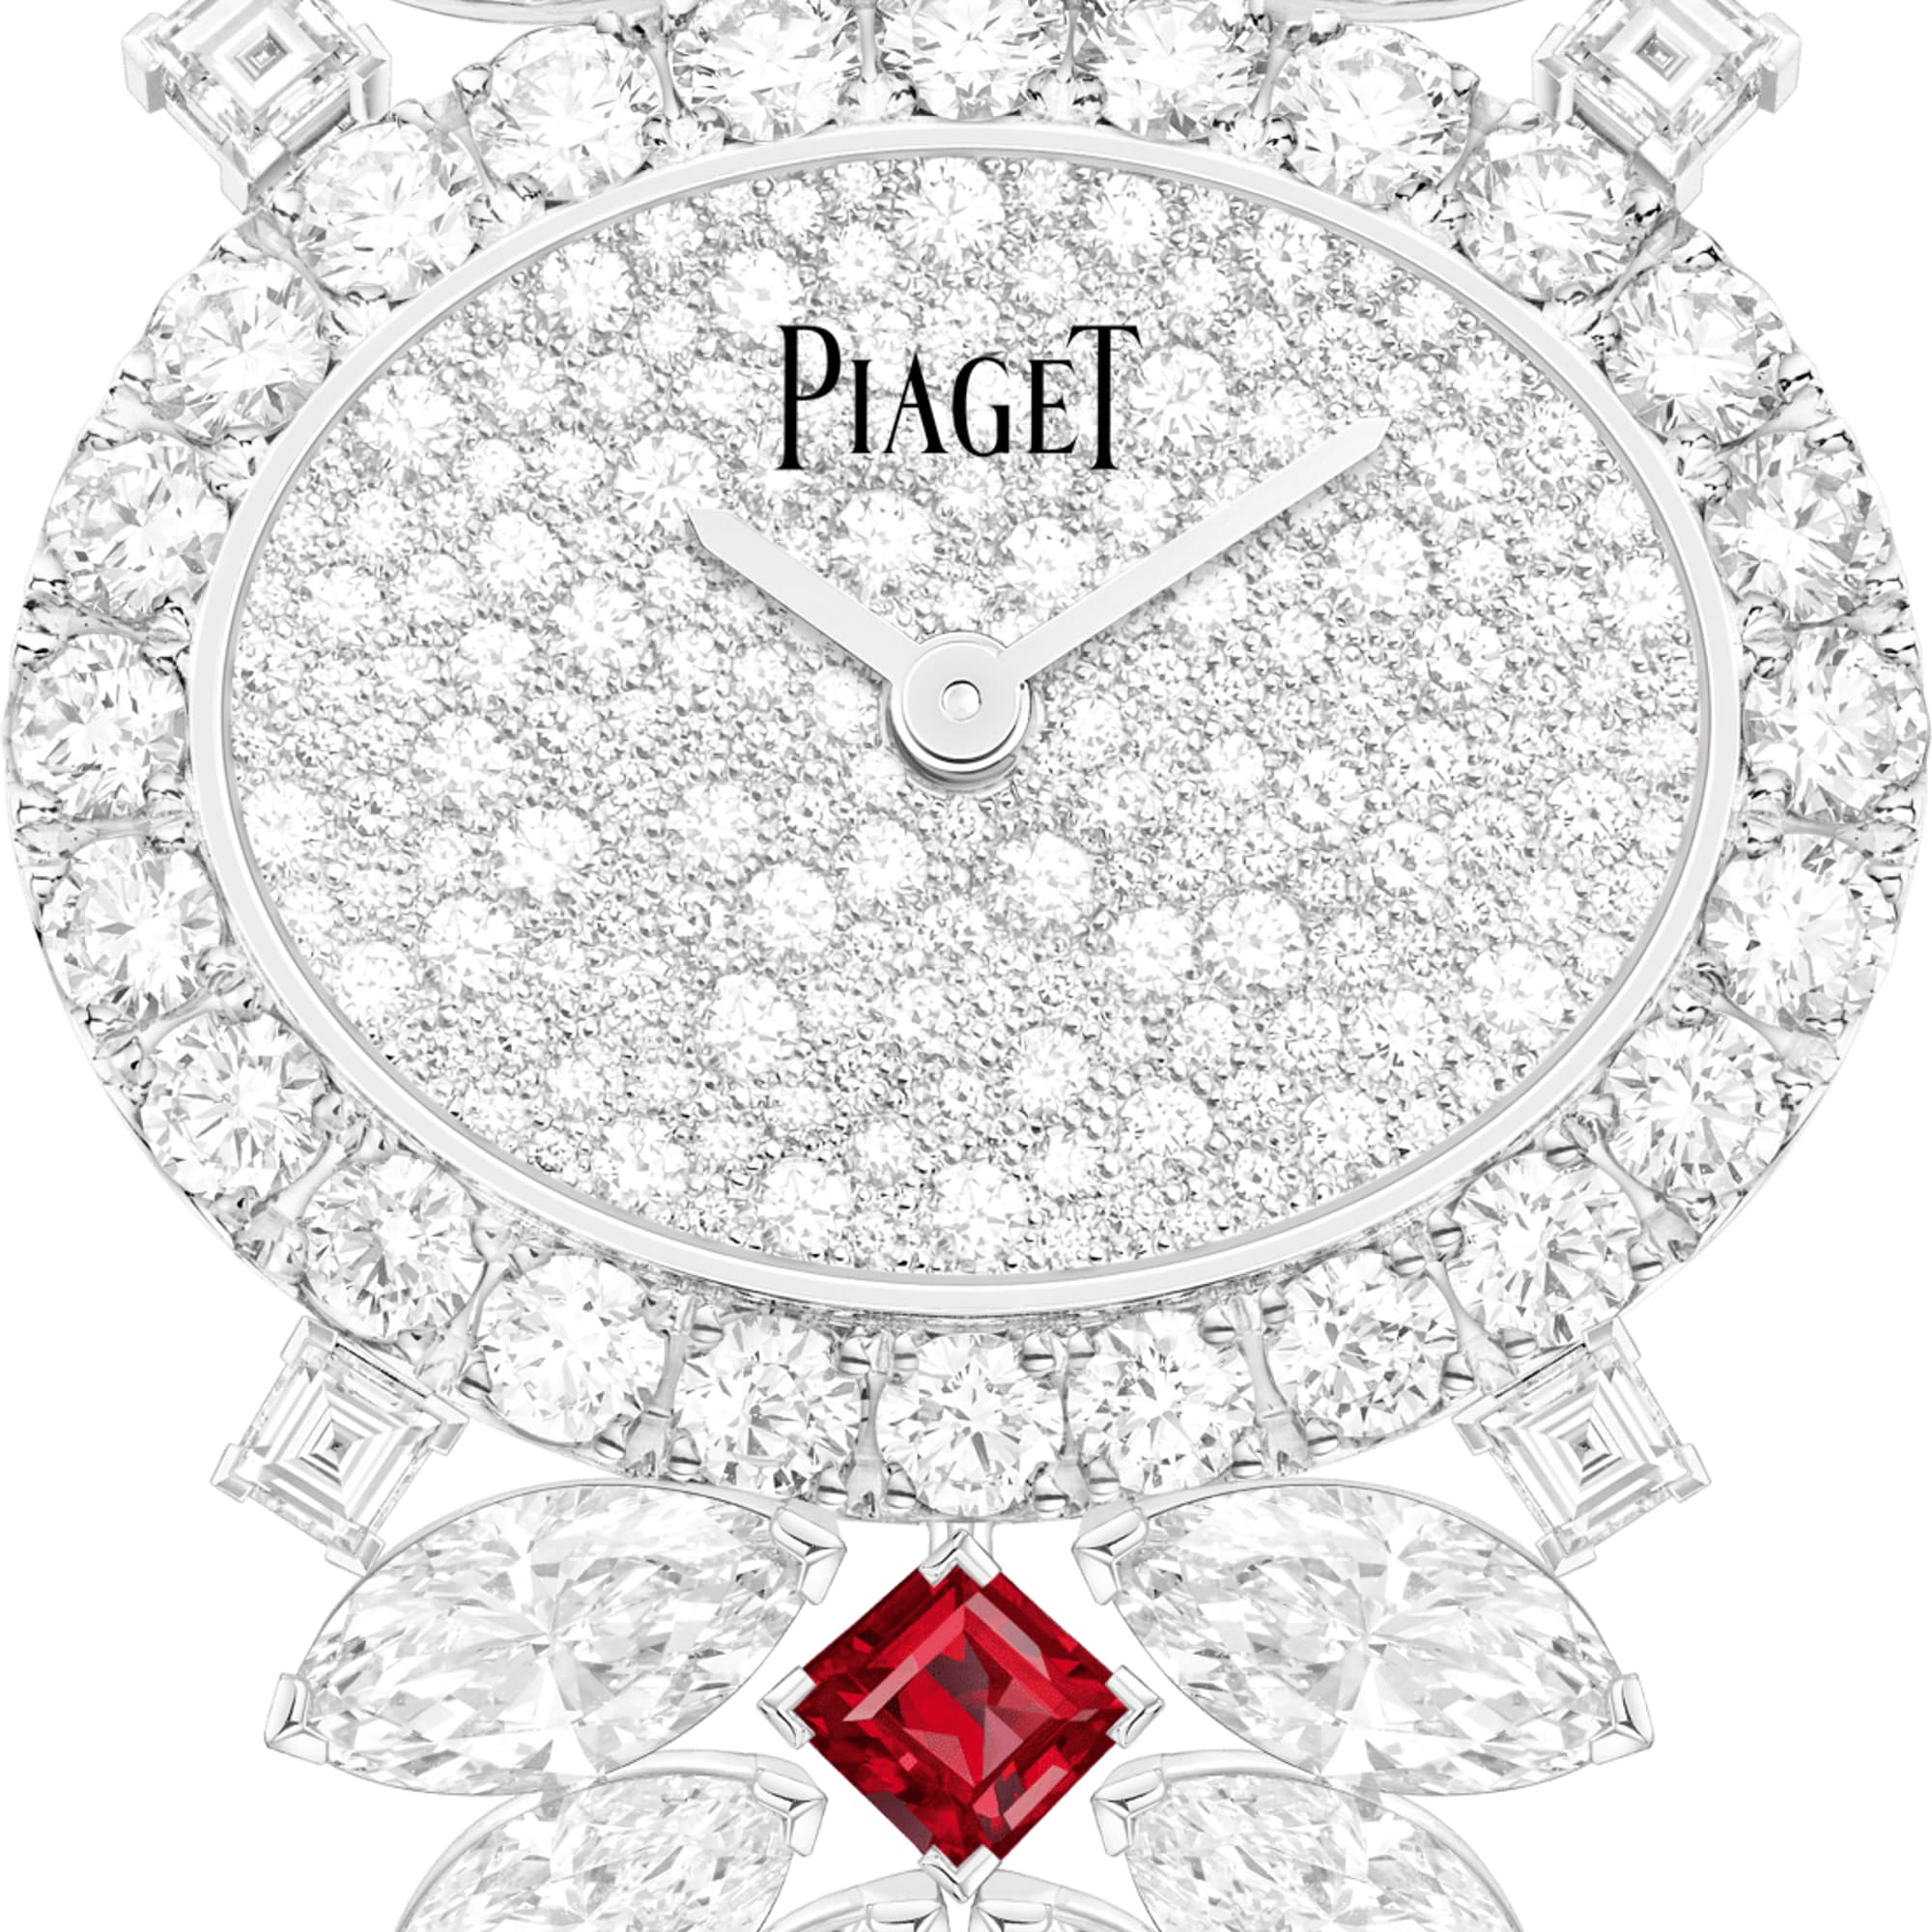 Piaget Presents the Third Chapter of its Solstice High Jewelry